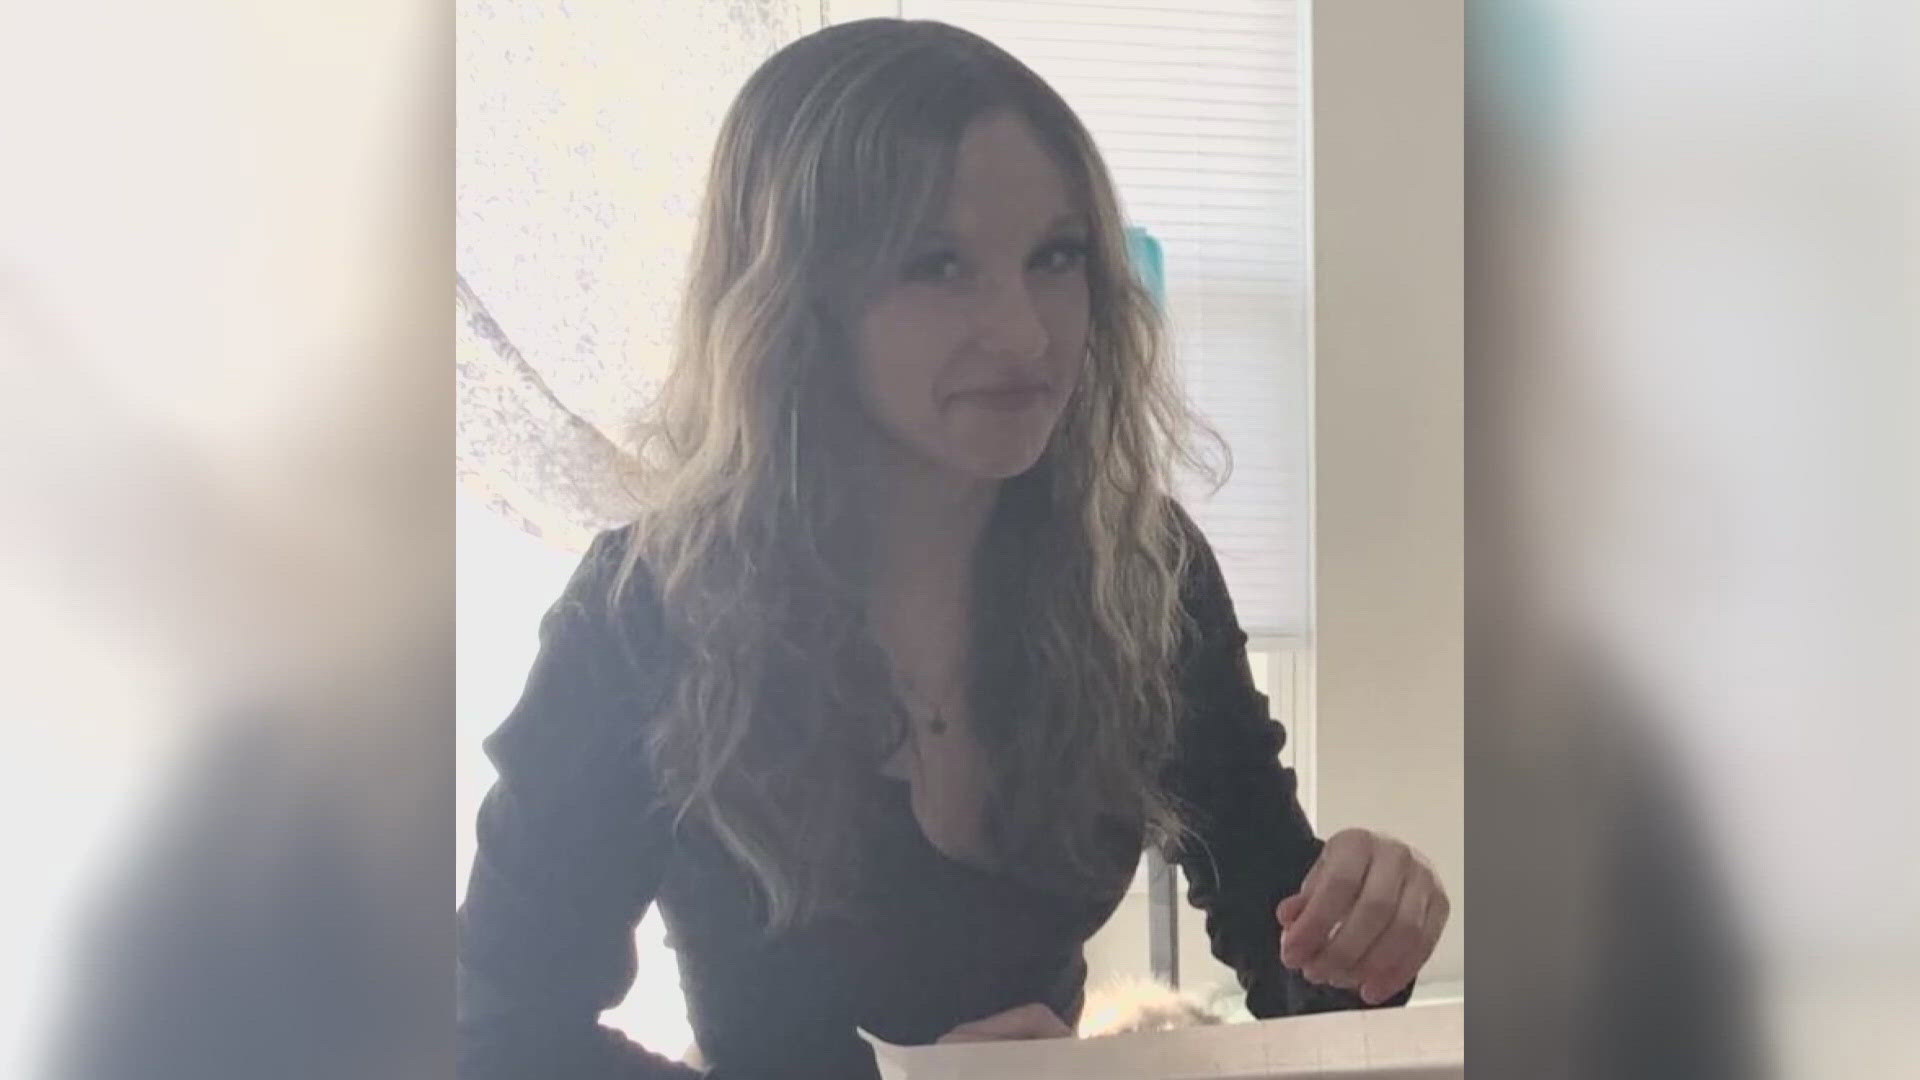 Attorney Bryan Kaemmerer said her family believes "it is not in the best interest of Kaylee's physical or mental health for her to attend (the hearing)."